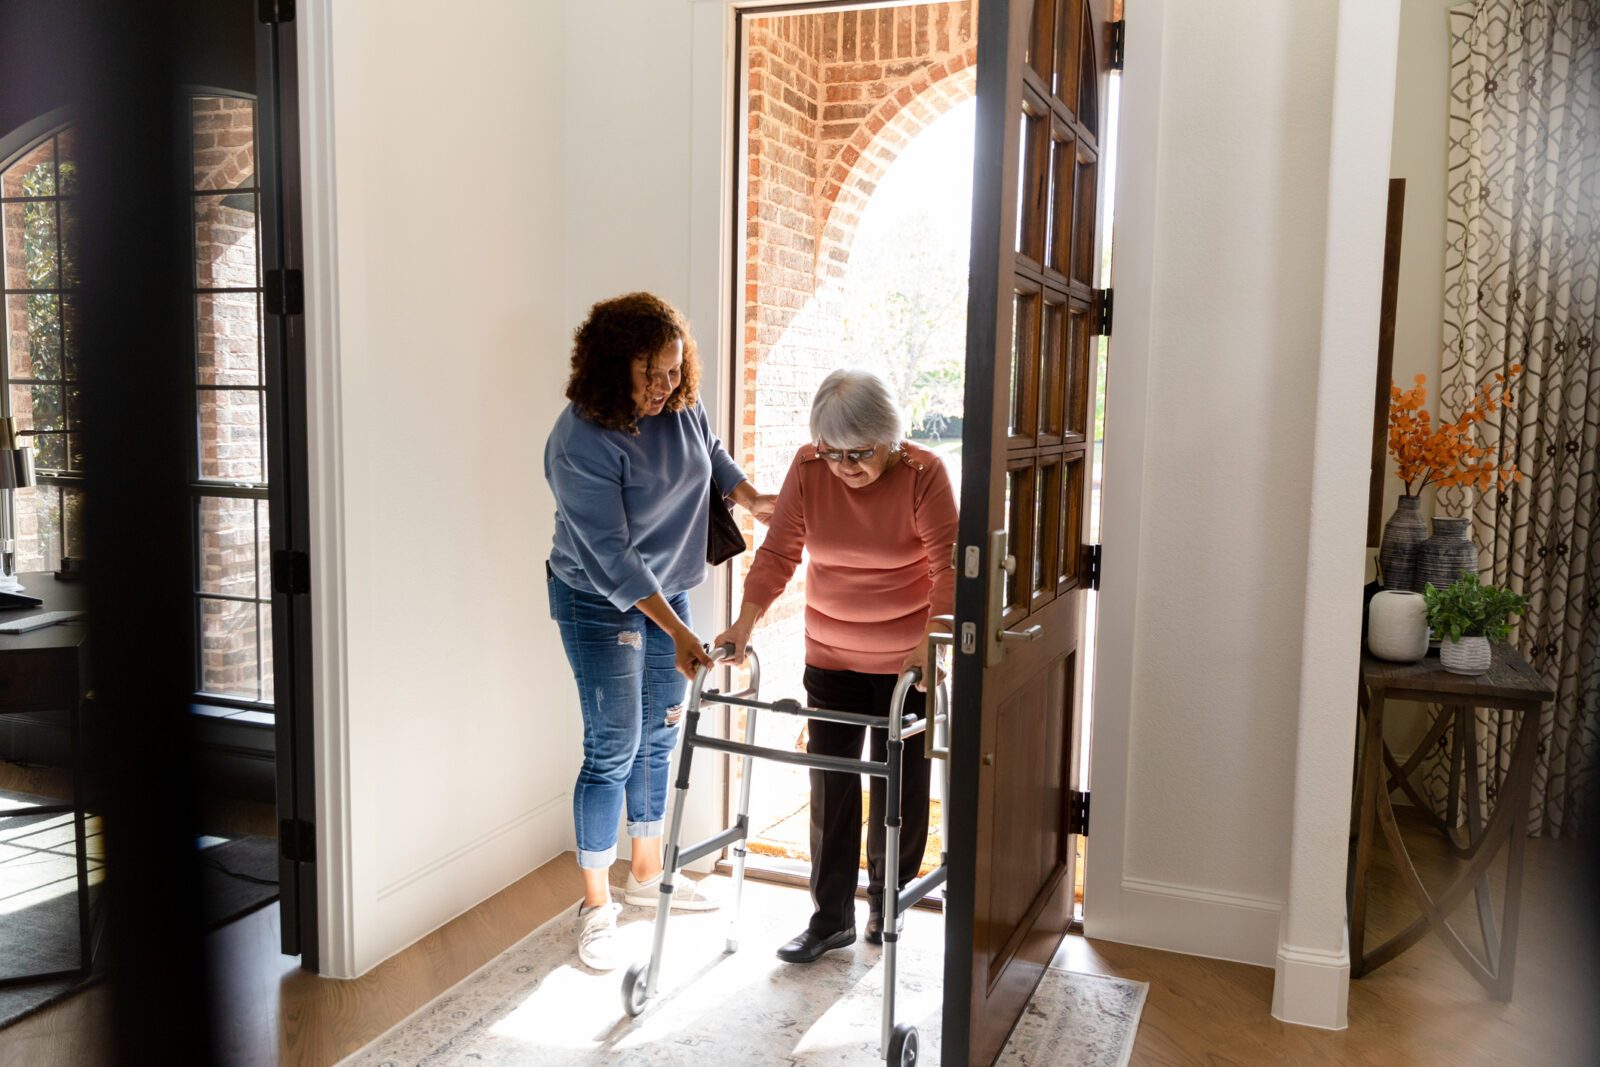 An adult woman caregiver helps a senior adult carefully enter her home.